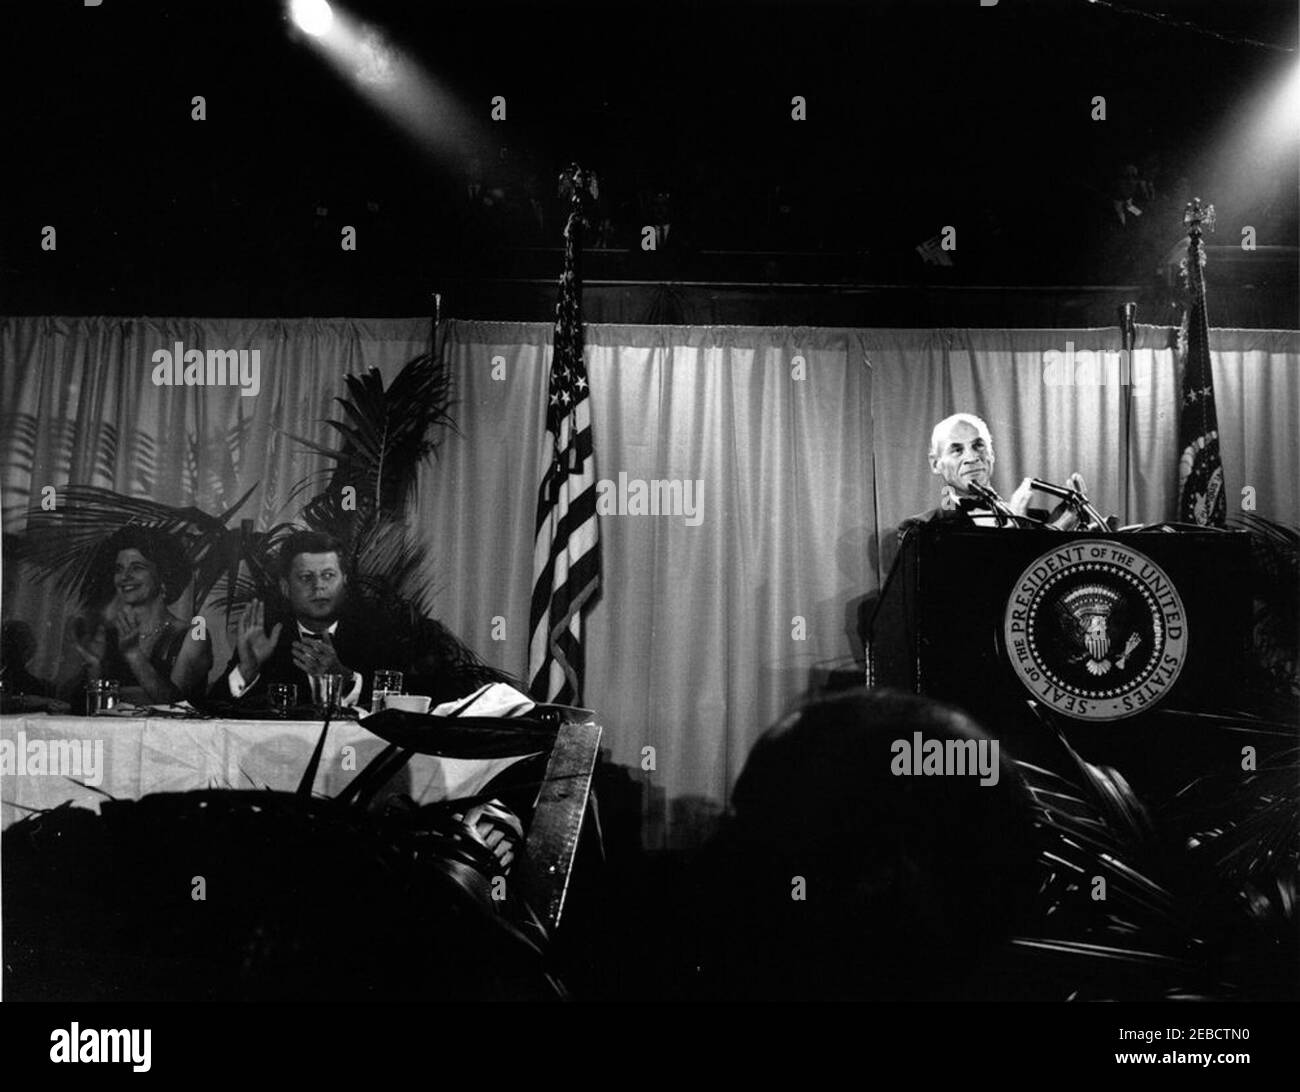 First Inaugural Salute to the President Dinner, Washington, D.C., National Guard Armory, 6:45PM. President John F. Kennedy attends the First Inaugural Salute to the President dinner, commemorating the anniversary of President Kennedyu2019s inauguration. Co-chairman of the dinner and owner of the Baltimore Colts football team, Carroll Rosenbloom, speaks at right; Jane Shields Freeman (co-chairman of the dinner and wife of the Secretary of Agriculture, Orville Freeman) sits at far left. National Guard Armory, Washington, D.C. Stock Photo